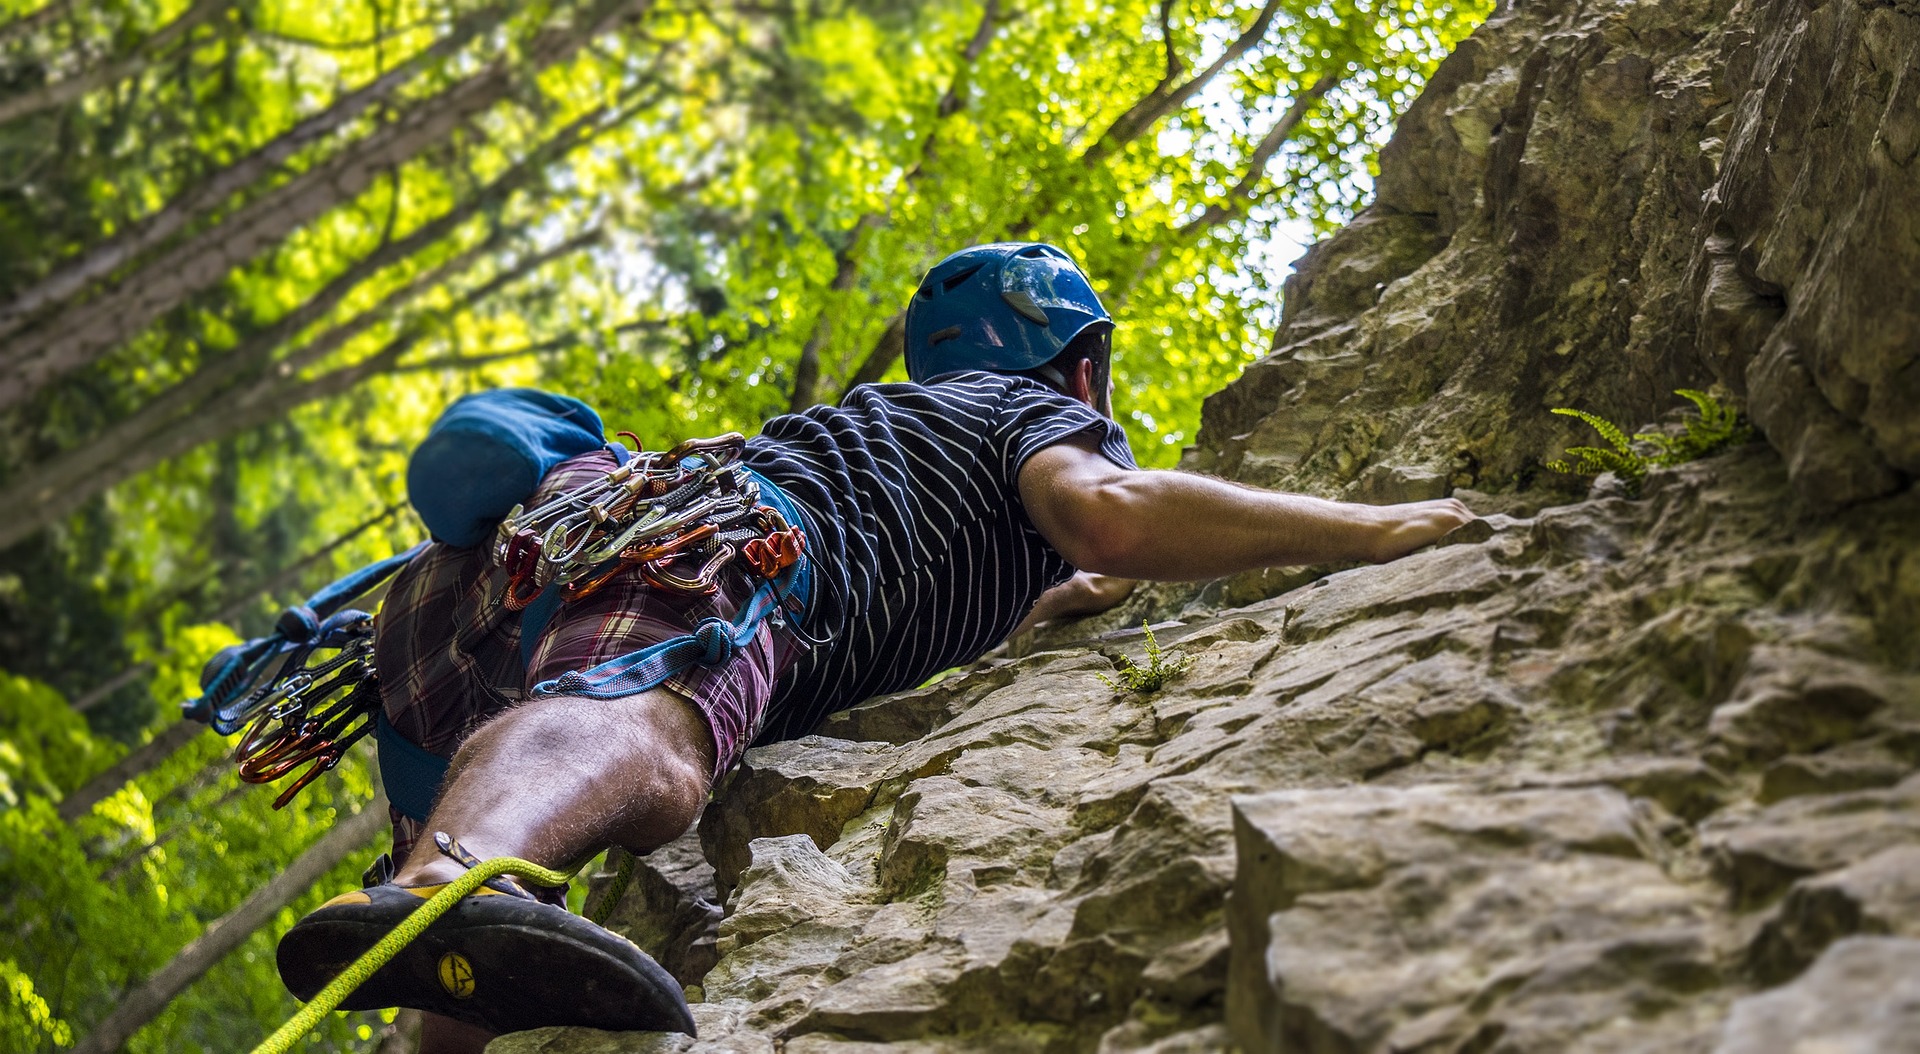 Wrocław Outdoor Climbing and Bouldering Guide: Top Locations, Facilities & Equipment Rental